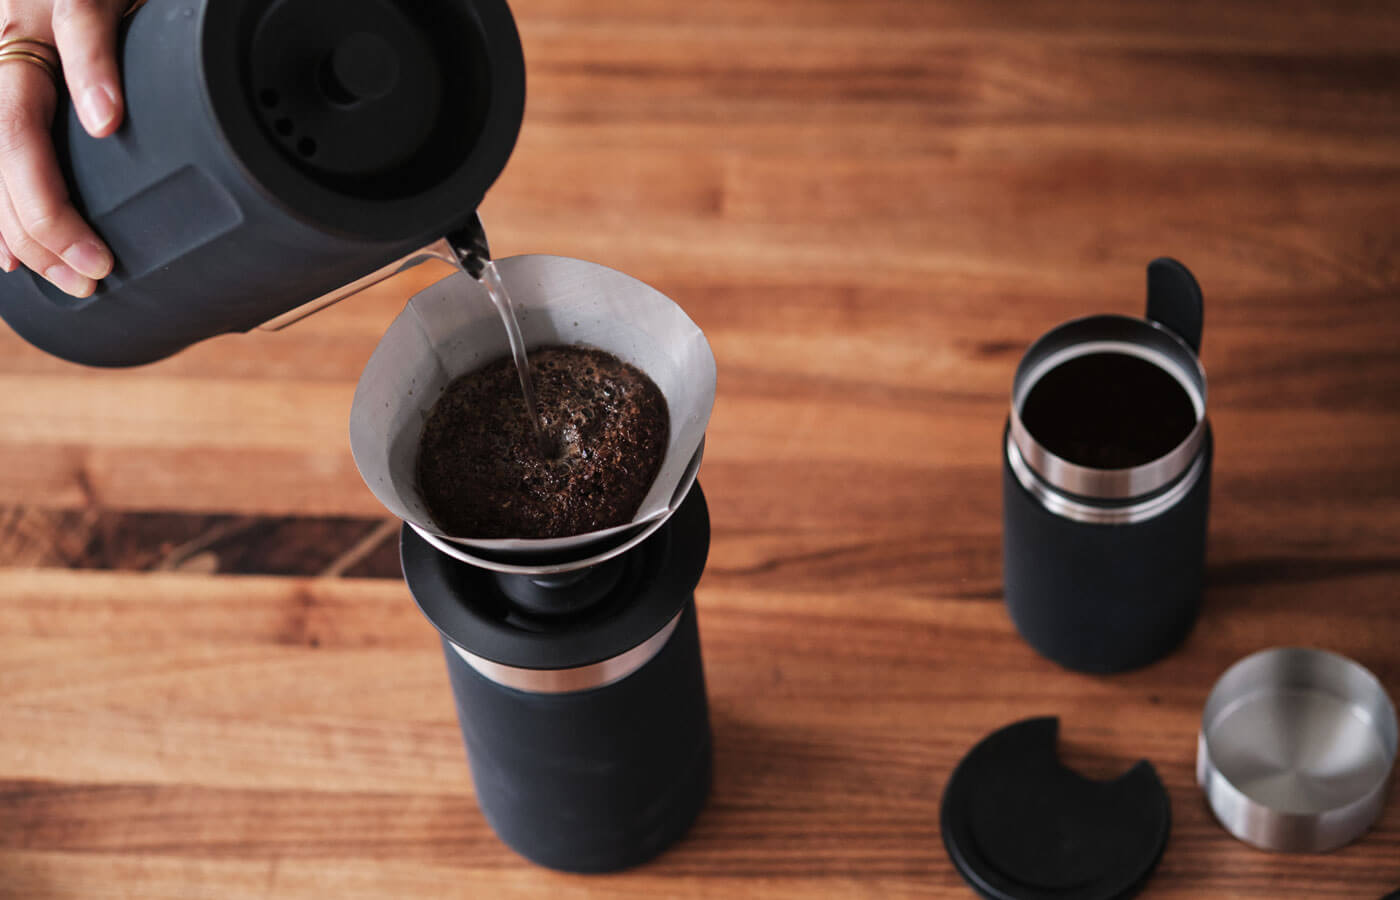 Brew pour over coffee anywhere with the included electric kettle